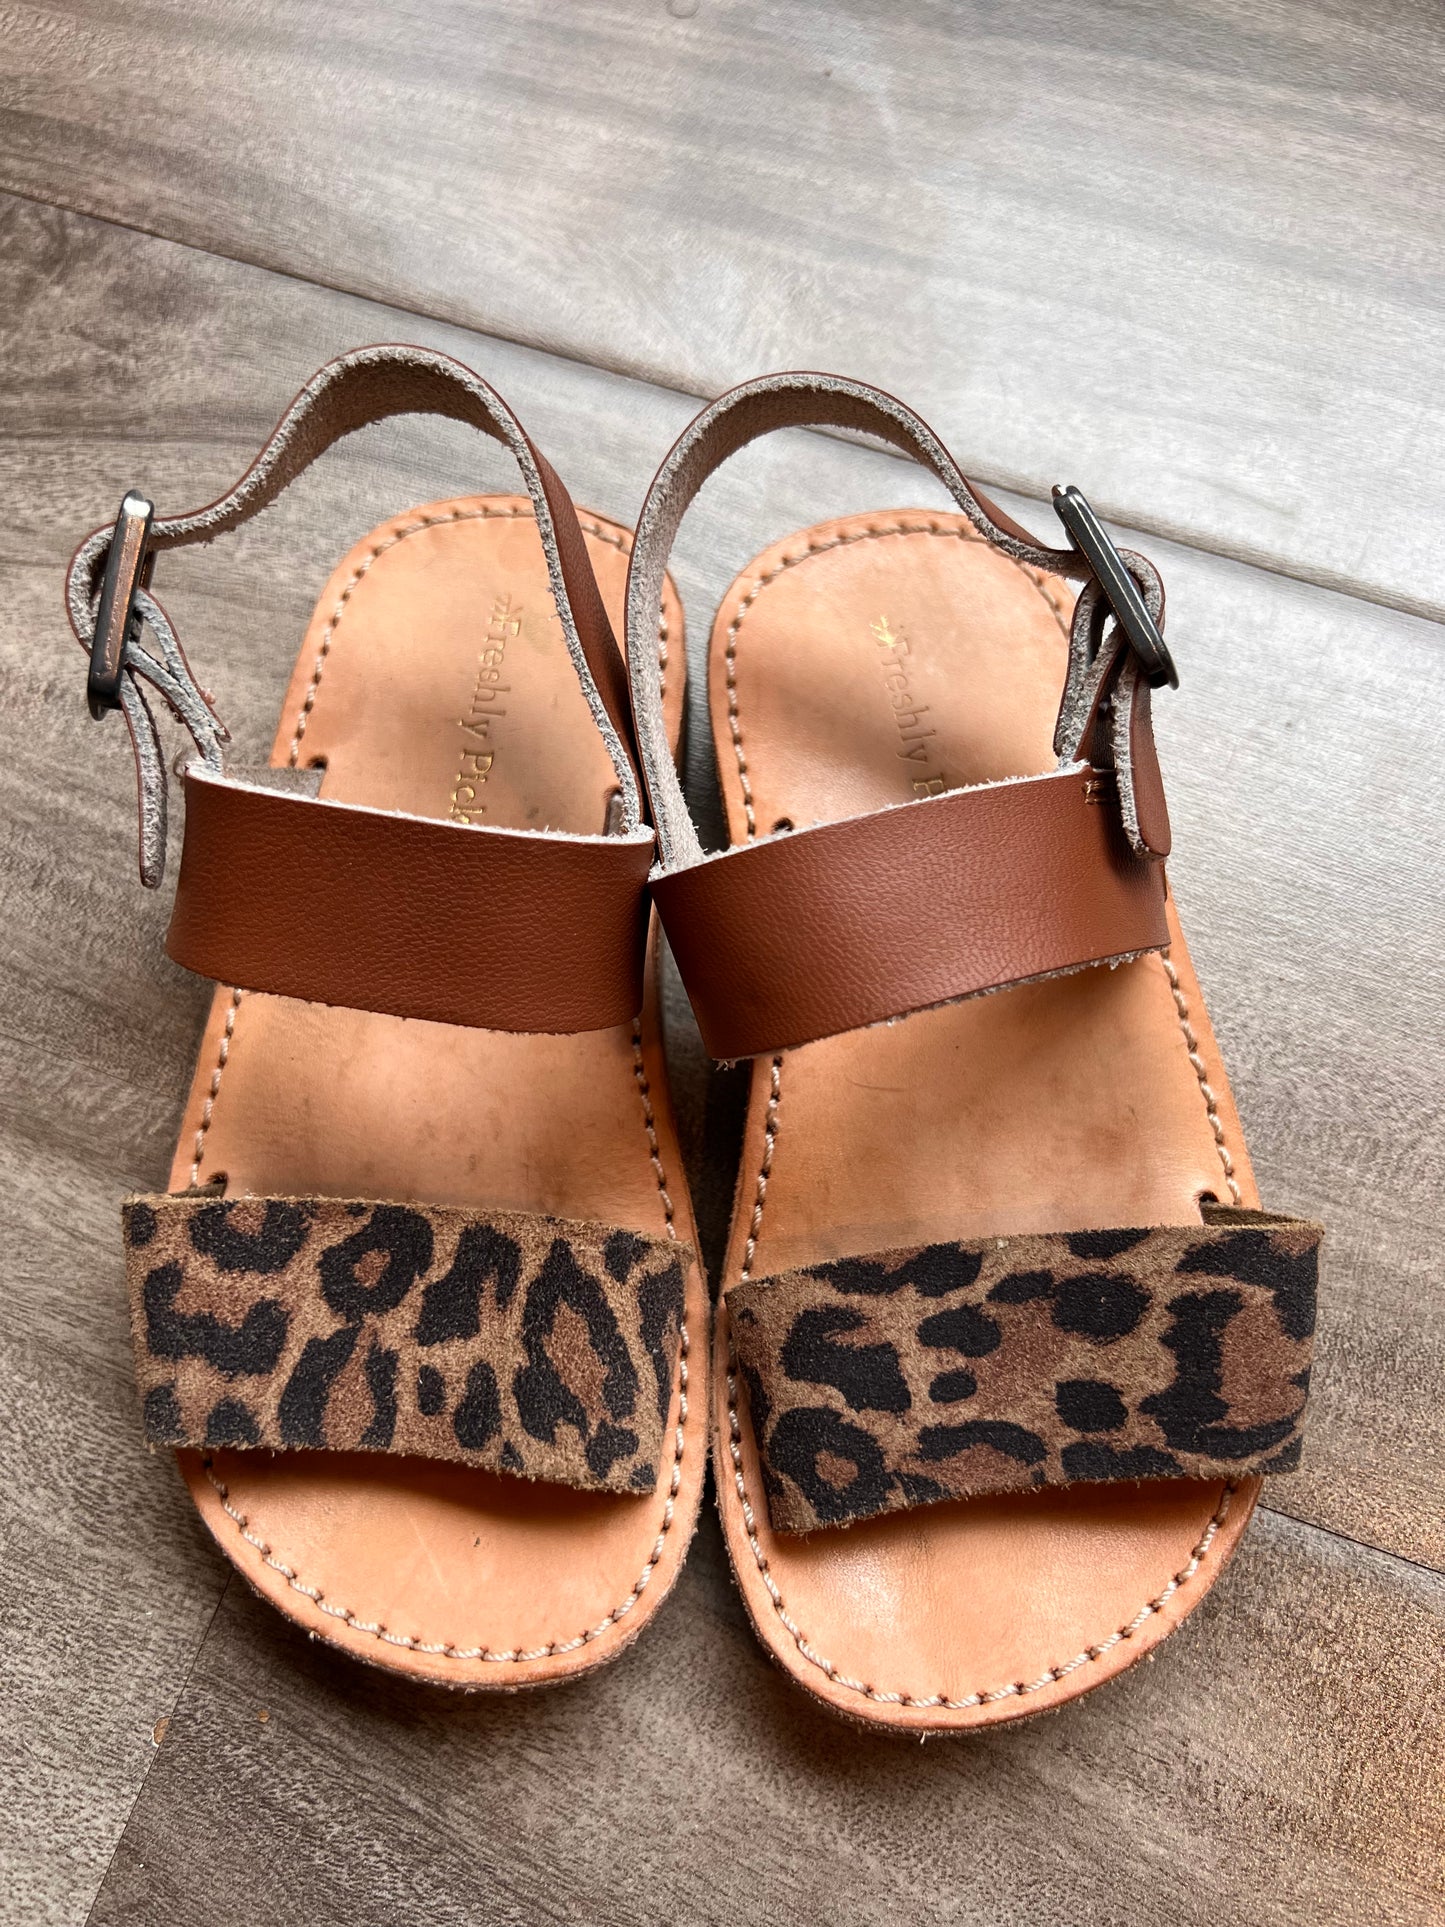 Girls 6 - Freshly Picked Leather Sandals